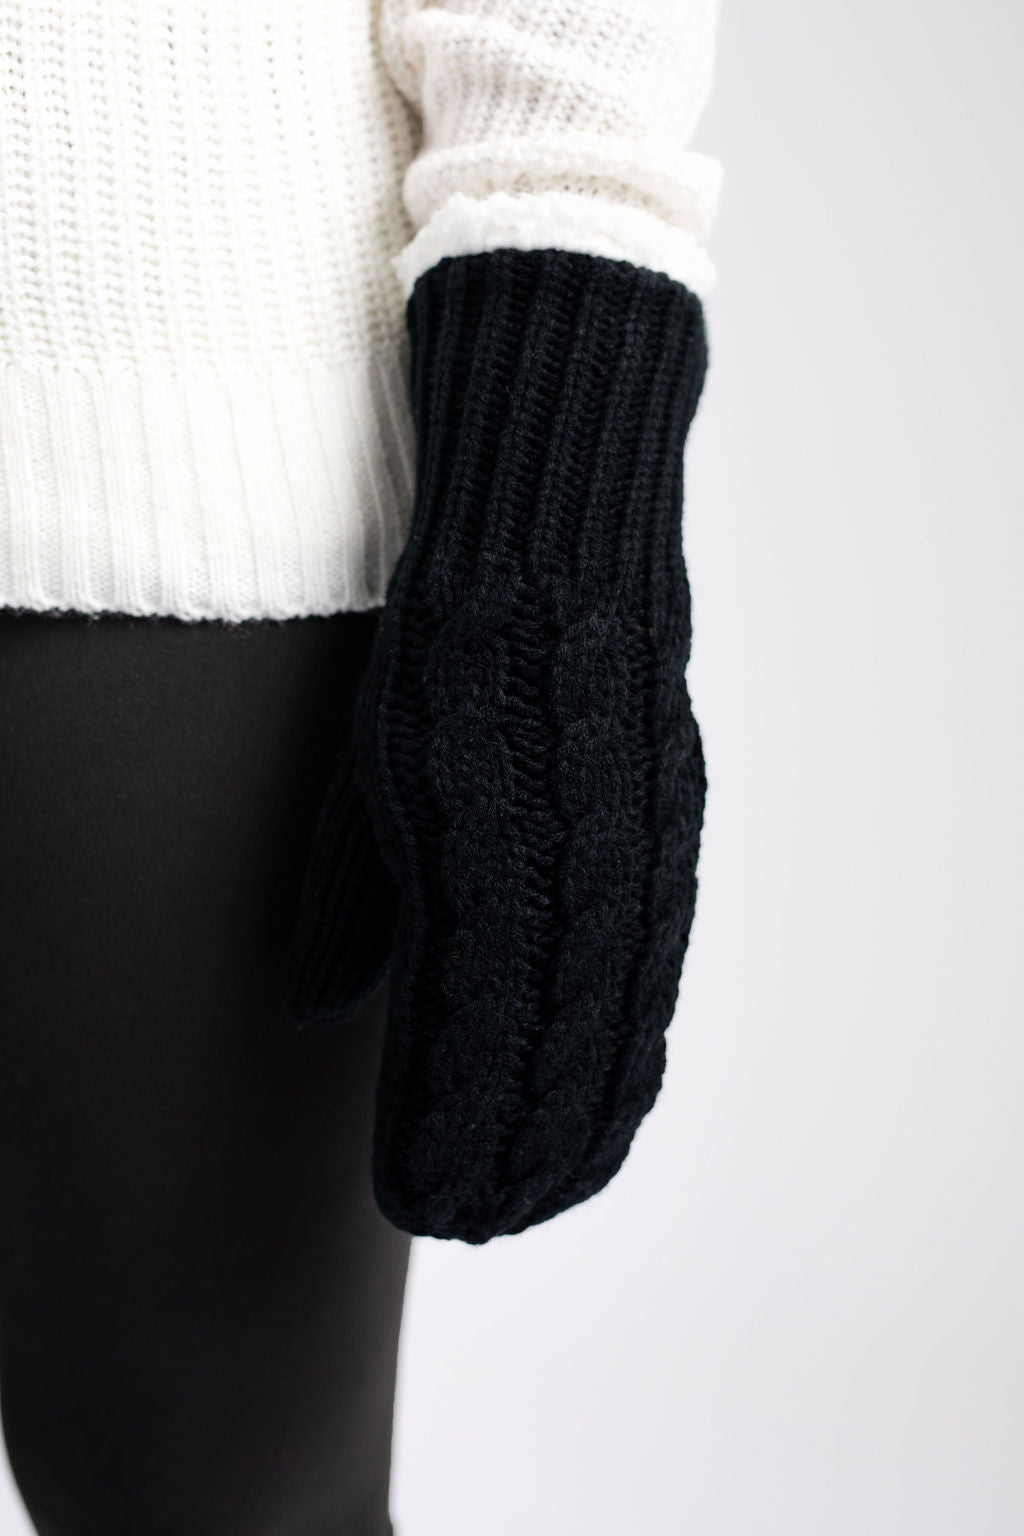 Just Cozy Accessories | Just Cozy Fleece-Lined Mittens | Color: Black/White | Size: Os | Pm-76800187's Closet